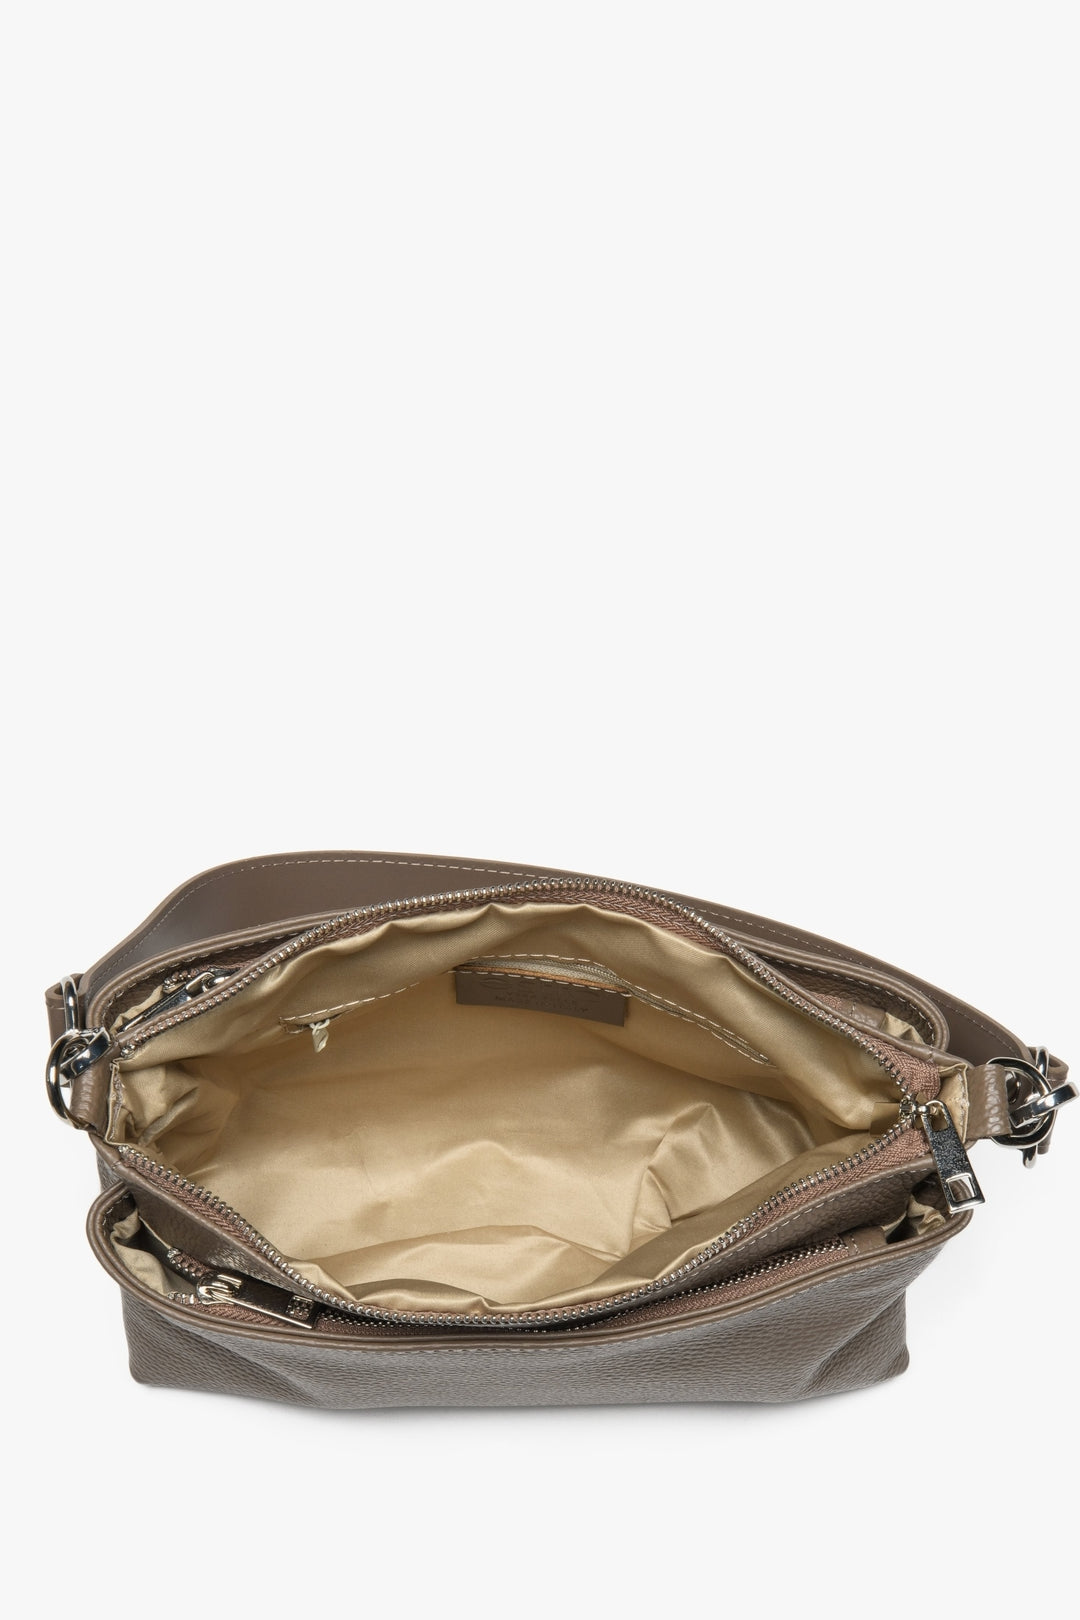  Women's brown Estro crossbody bag made from genuine leather - close-up on the interior of the model.